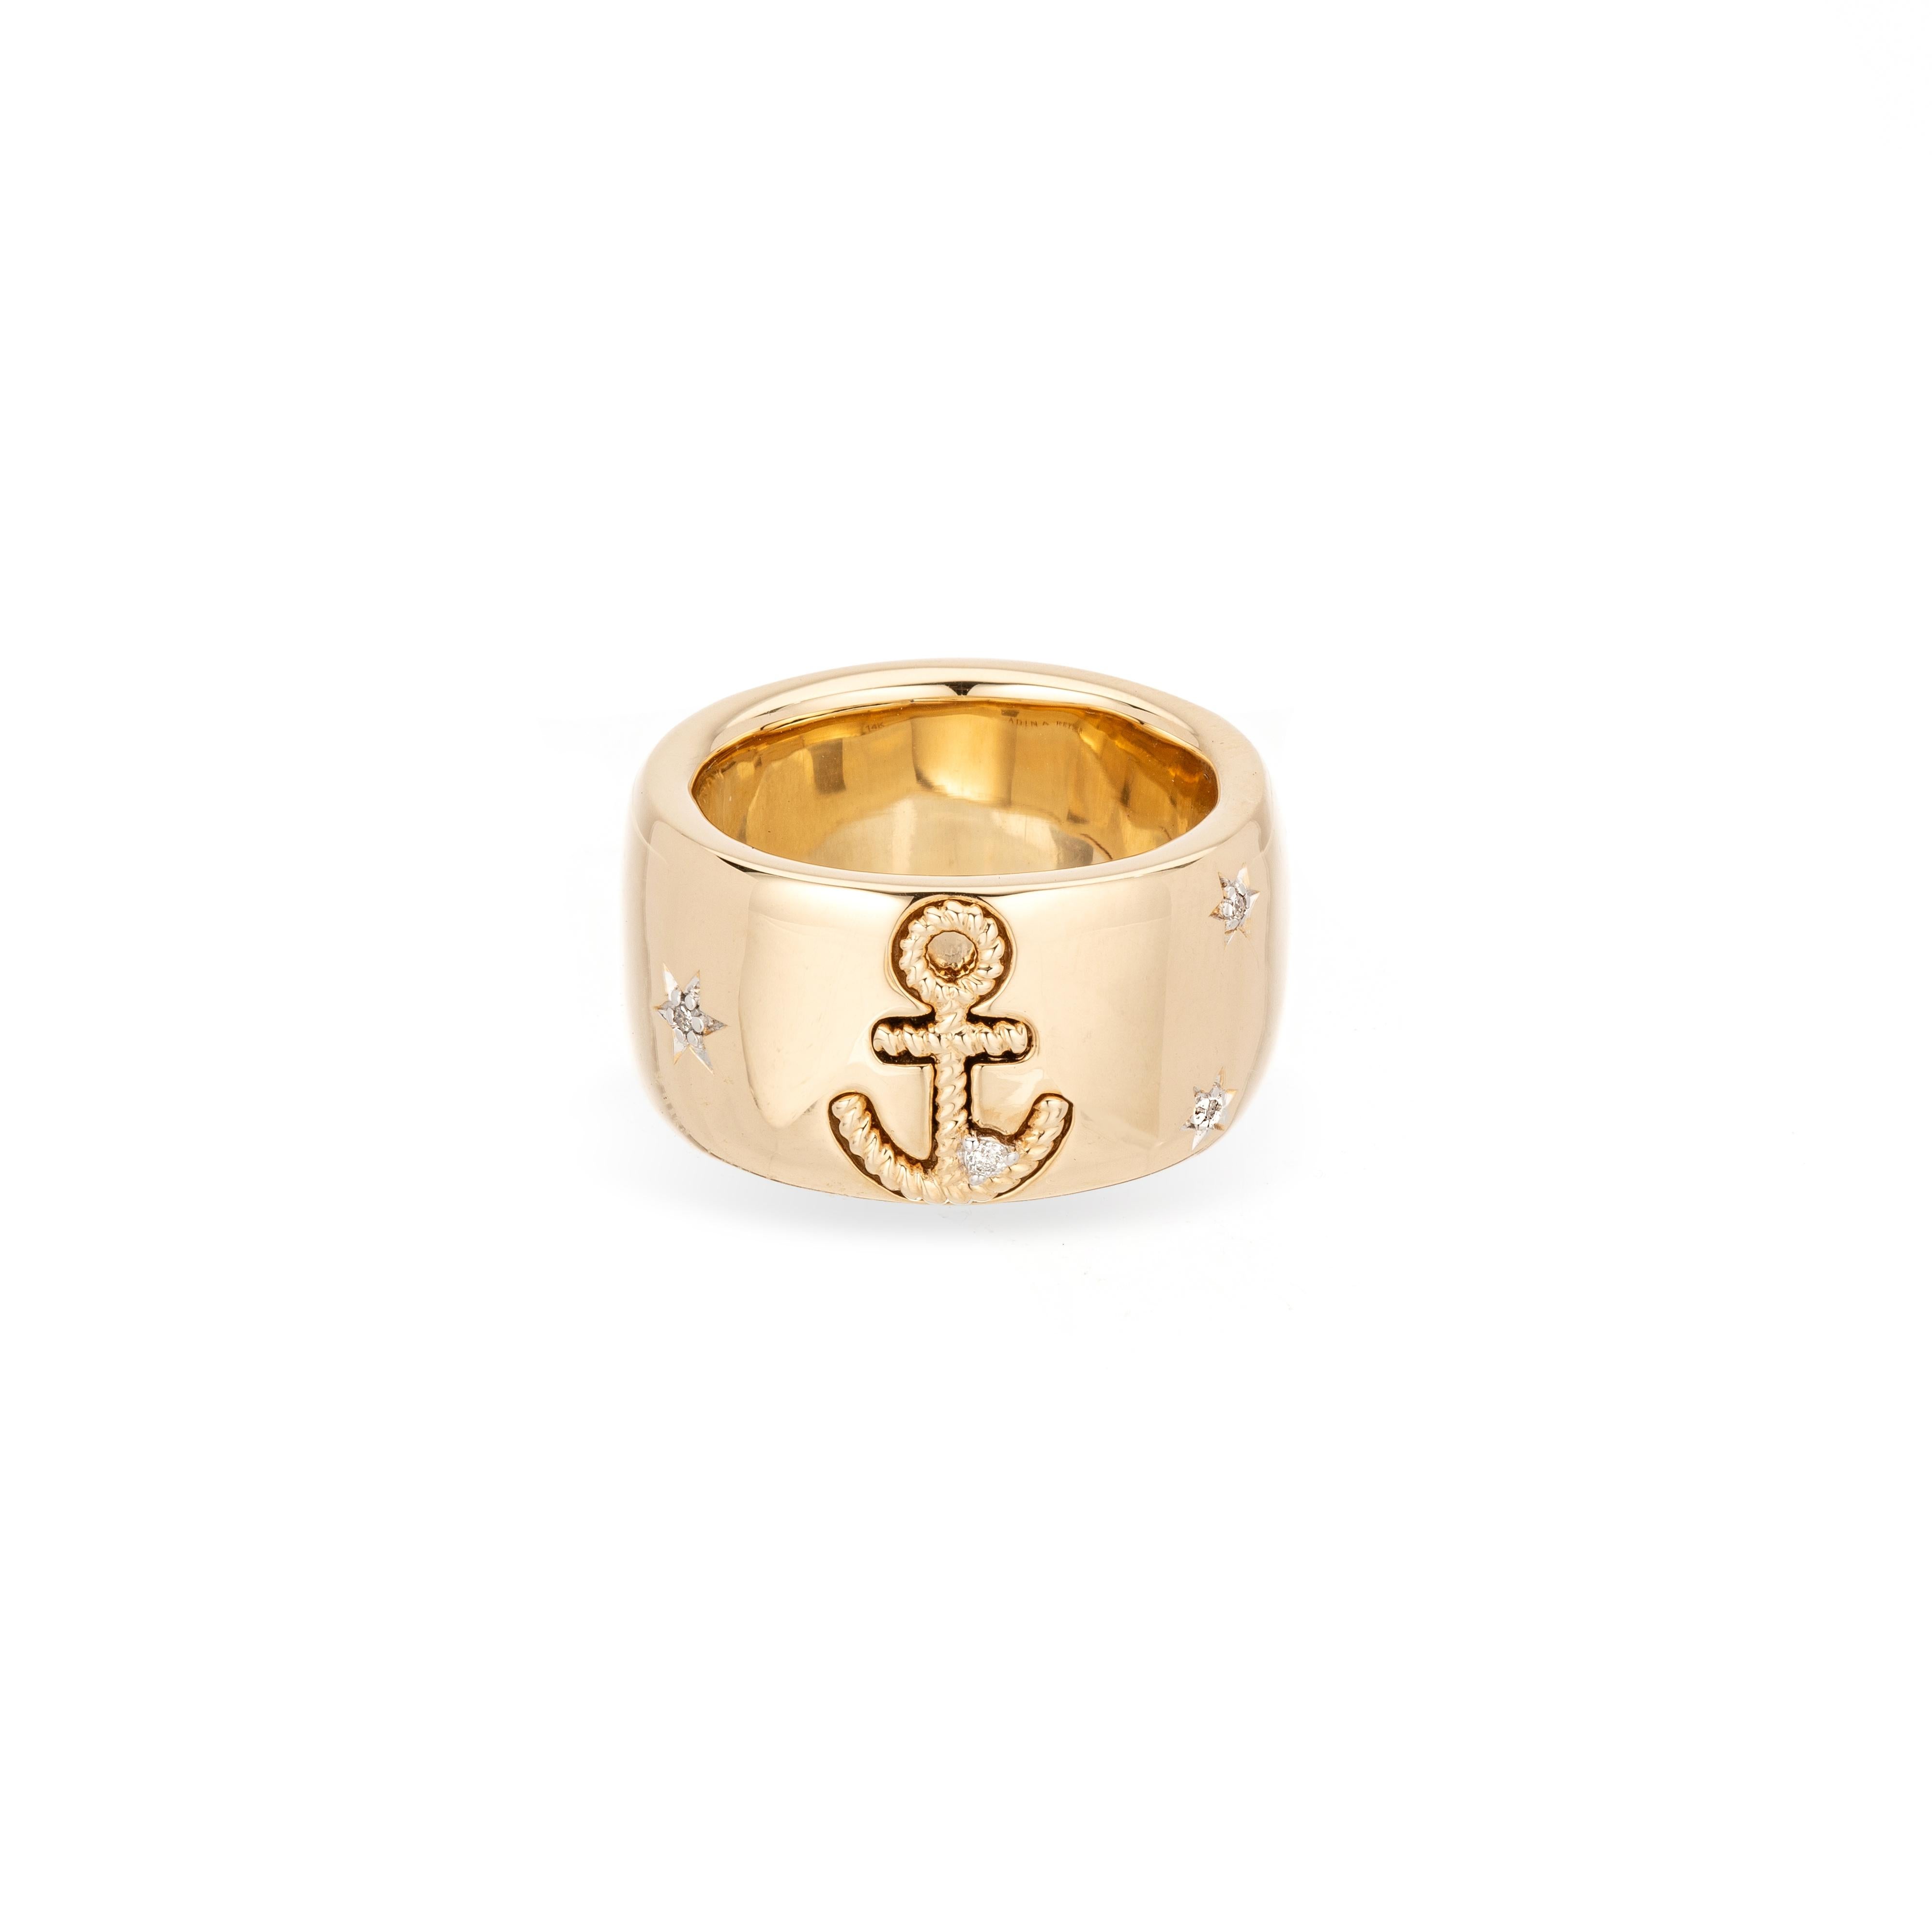 Adina Reyter One of a Kind Pavé Anchor + Compass Barrel Ring - Y14

14k yellow gold barrel ring with an anchor and compass symbols, embellished with hand set diamonds. 

Measurements: 3mm band, Ring size 6

Total Diamond Carat Weight: 0.06 CT

